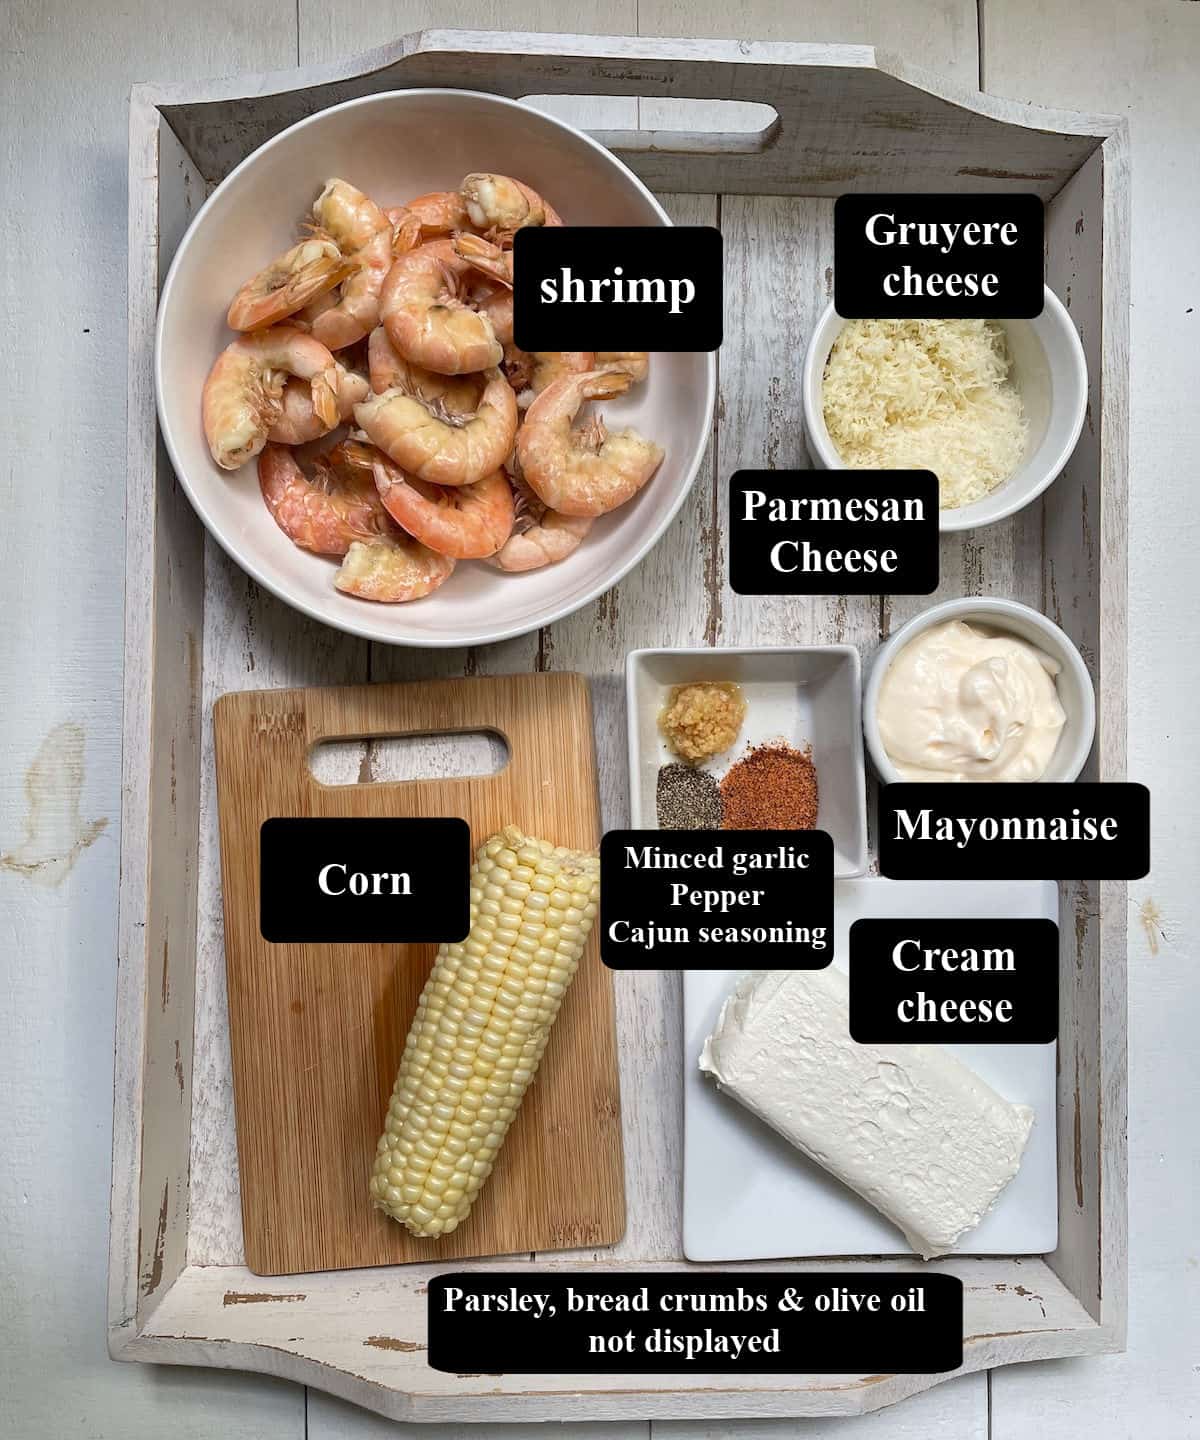 Ingredients for Shrimp dip on a white tray.